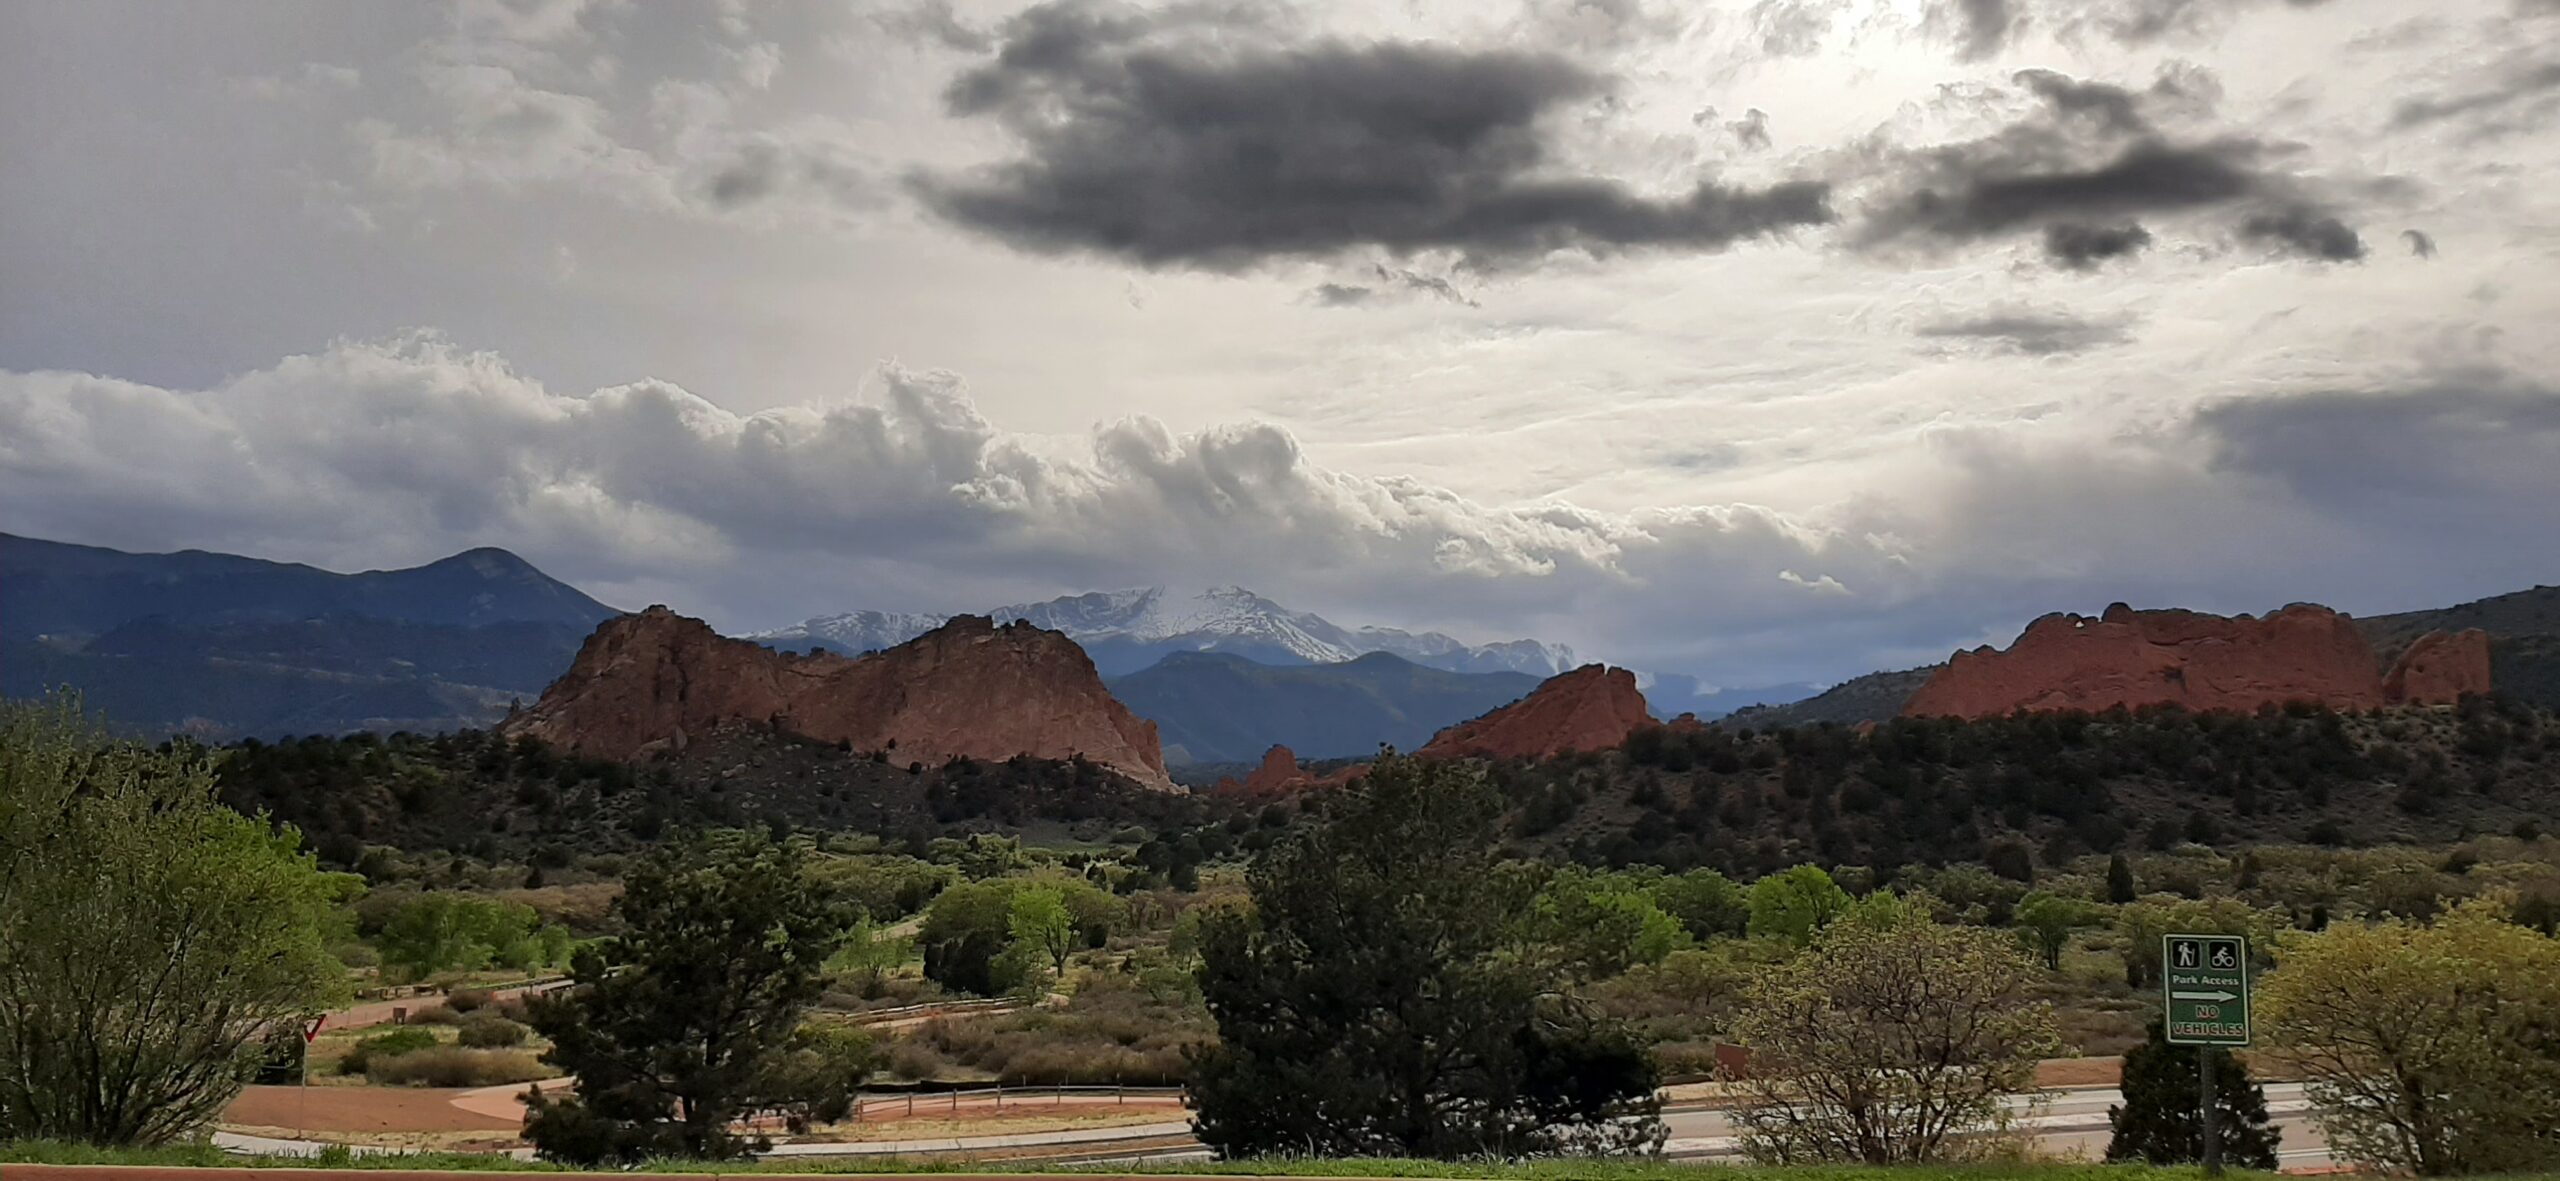 The view of Pike's Peak from the Visitor's Center of Garden of the Gods